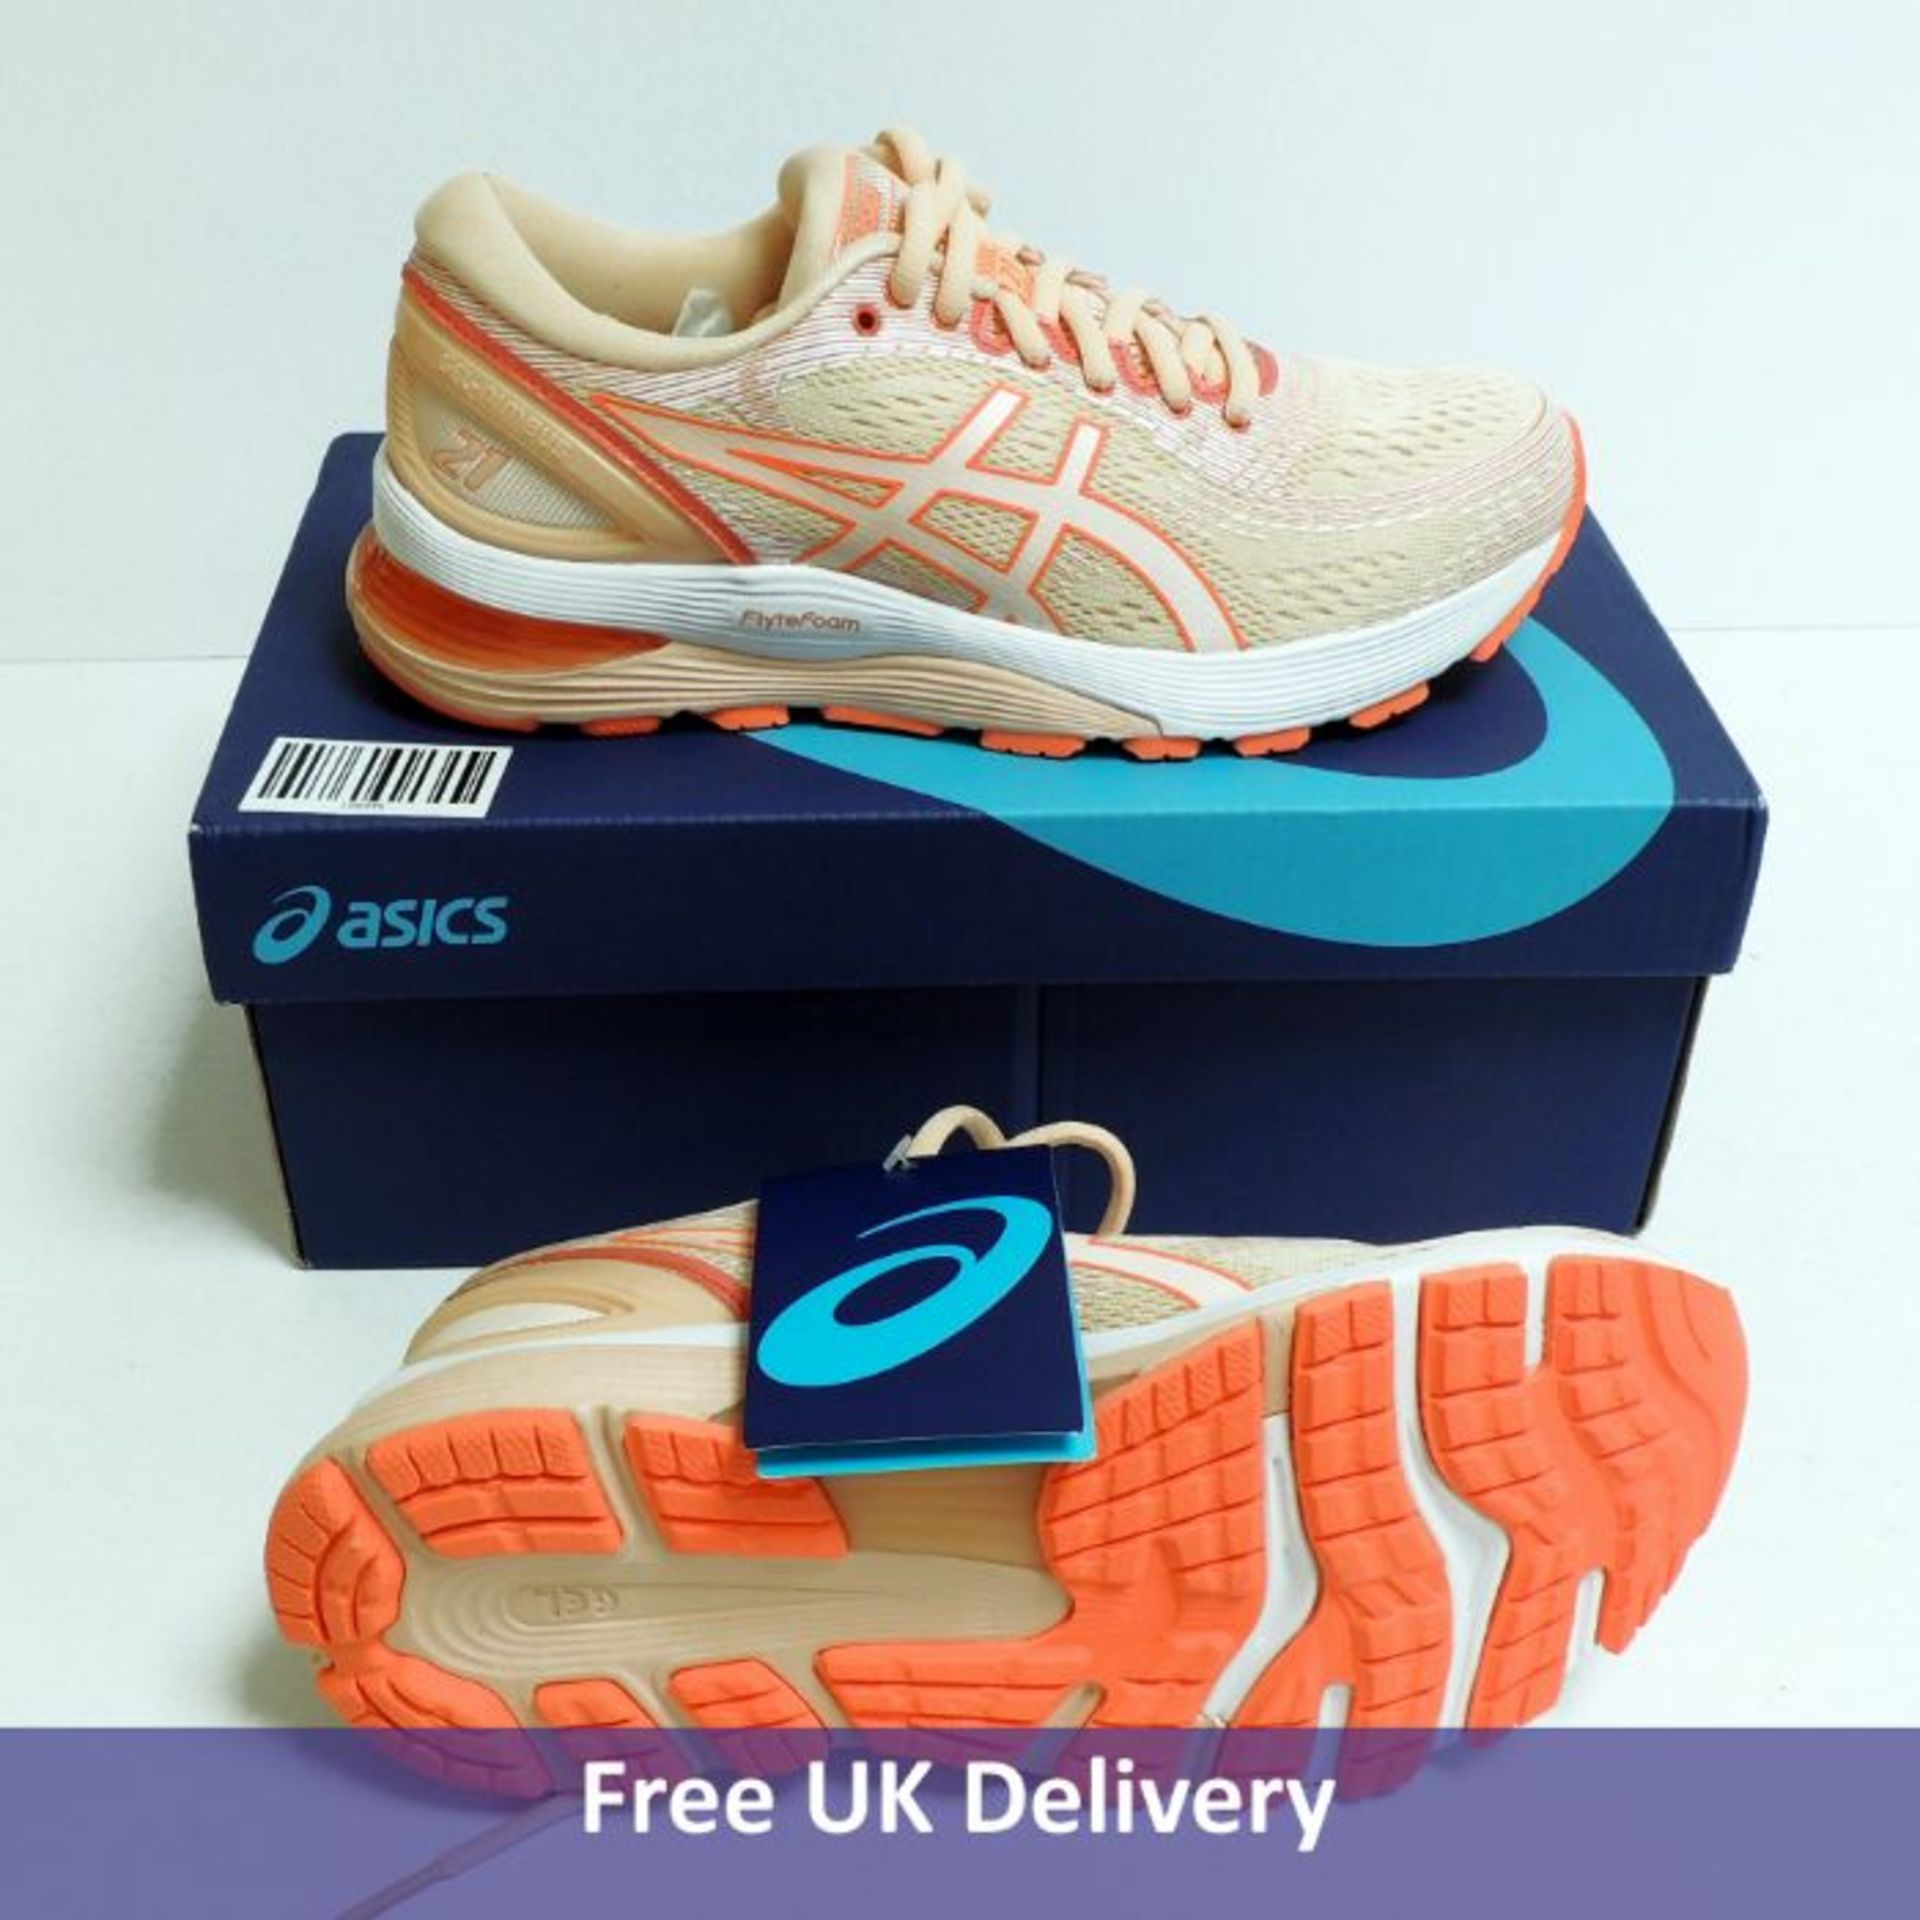 Asics Women's Gel-Nimbus 21 W Trainers, Baked Pink and White, UK 5